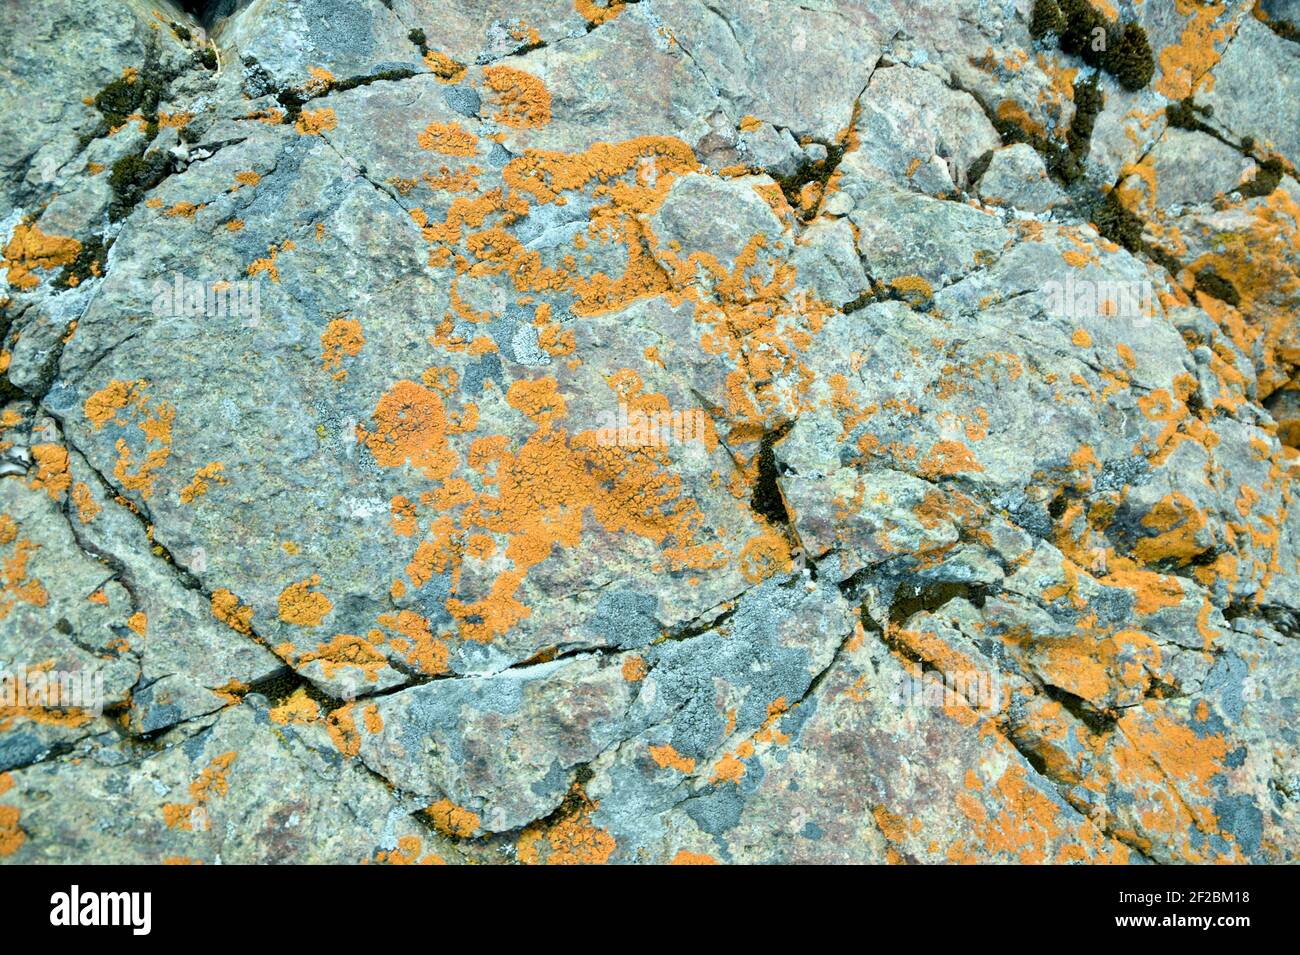 Abstract Background of Colorful Orange and Gold Moss on Granite Rocks. Stock Photo